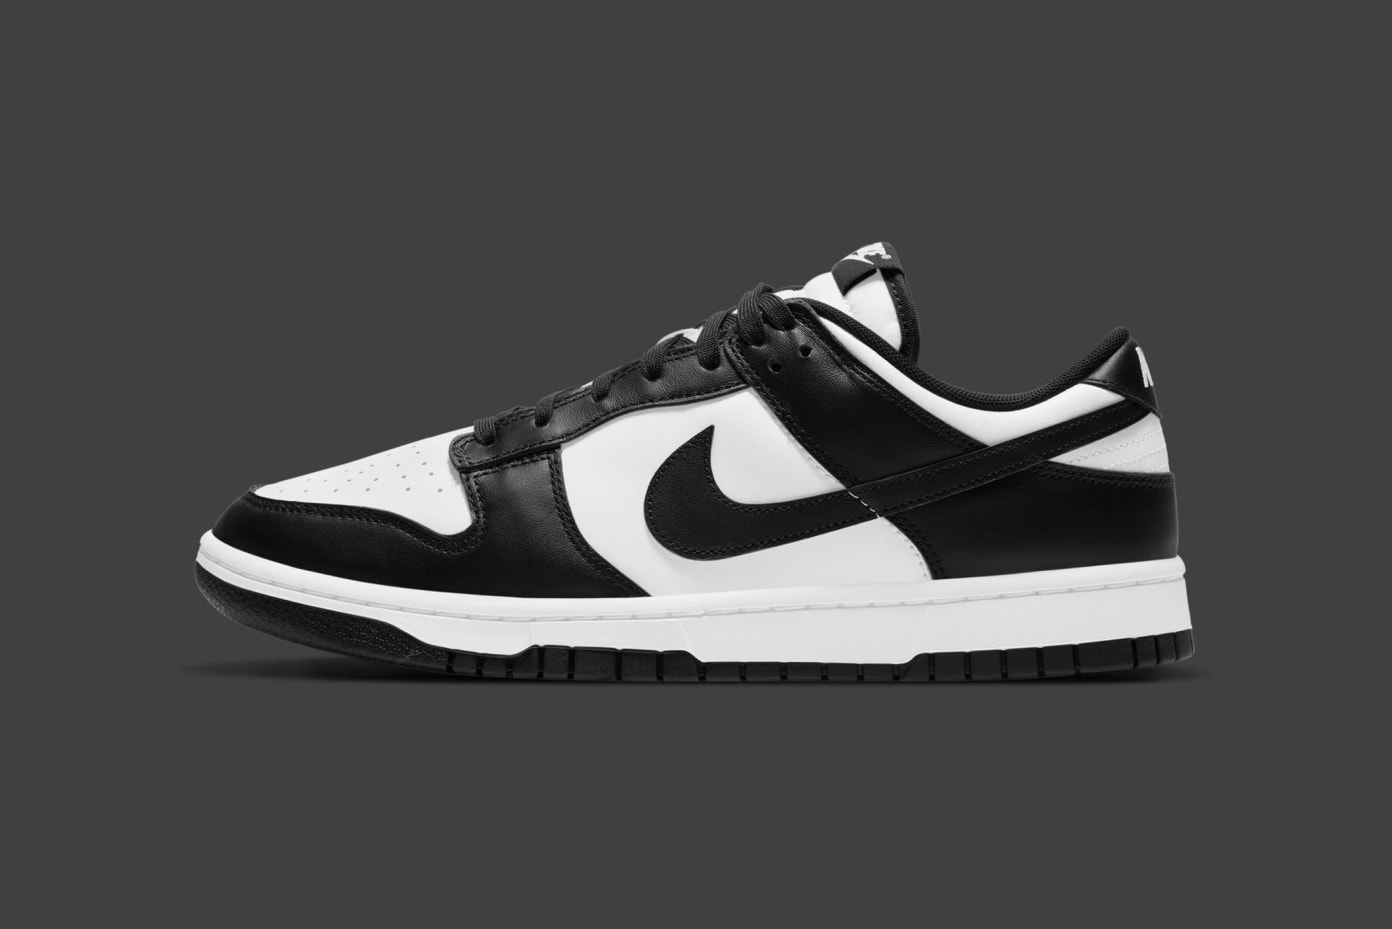 Swag Craze: First Look: Nike Dunk Low - White/Black